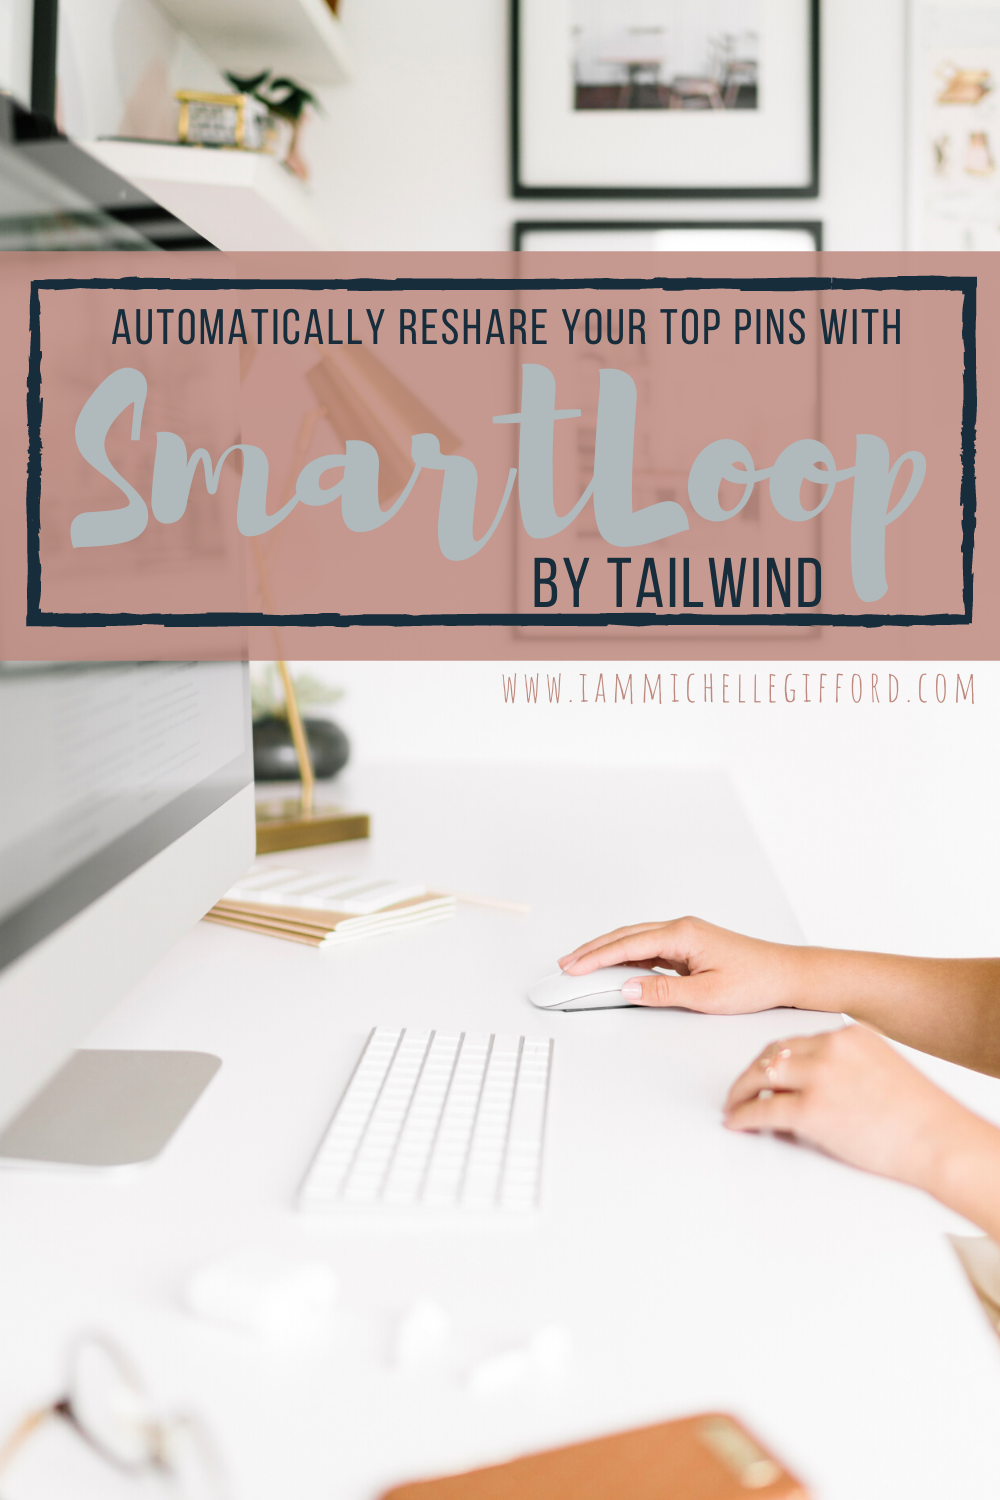 How to Use Tailwind's SmartLoop-Automatically reshare your top pins www.iammichellegifford.com